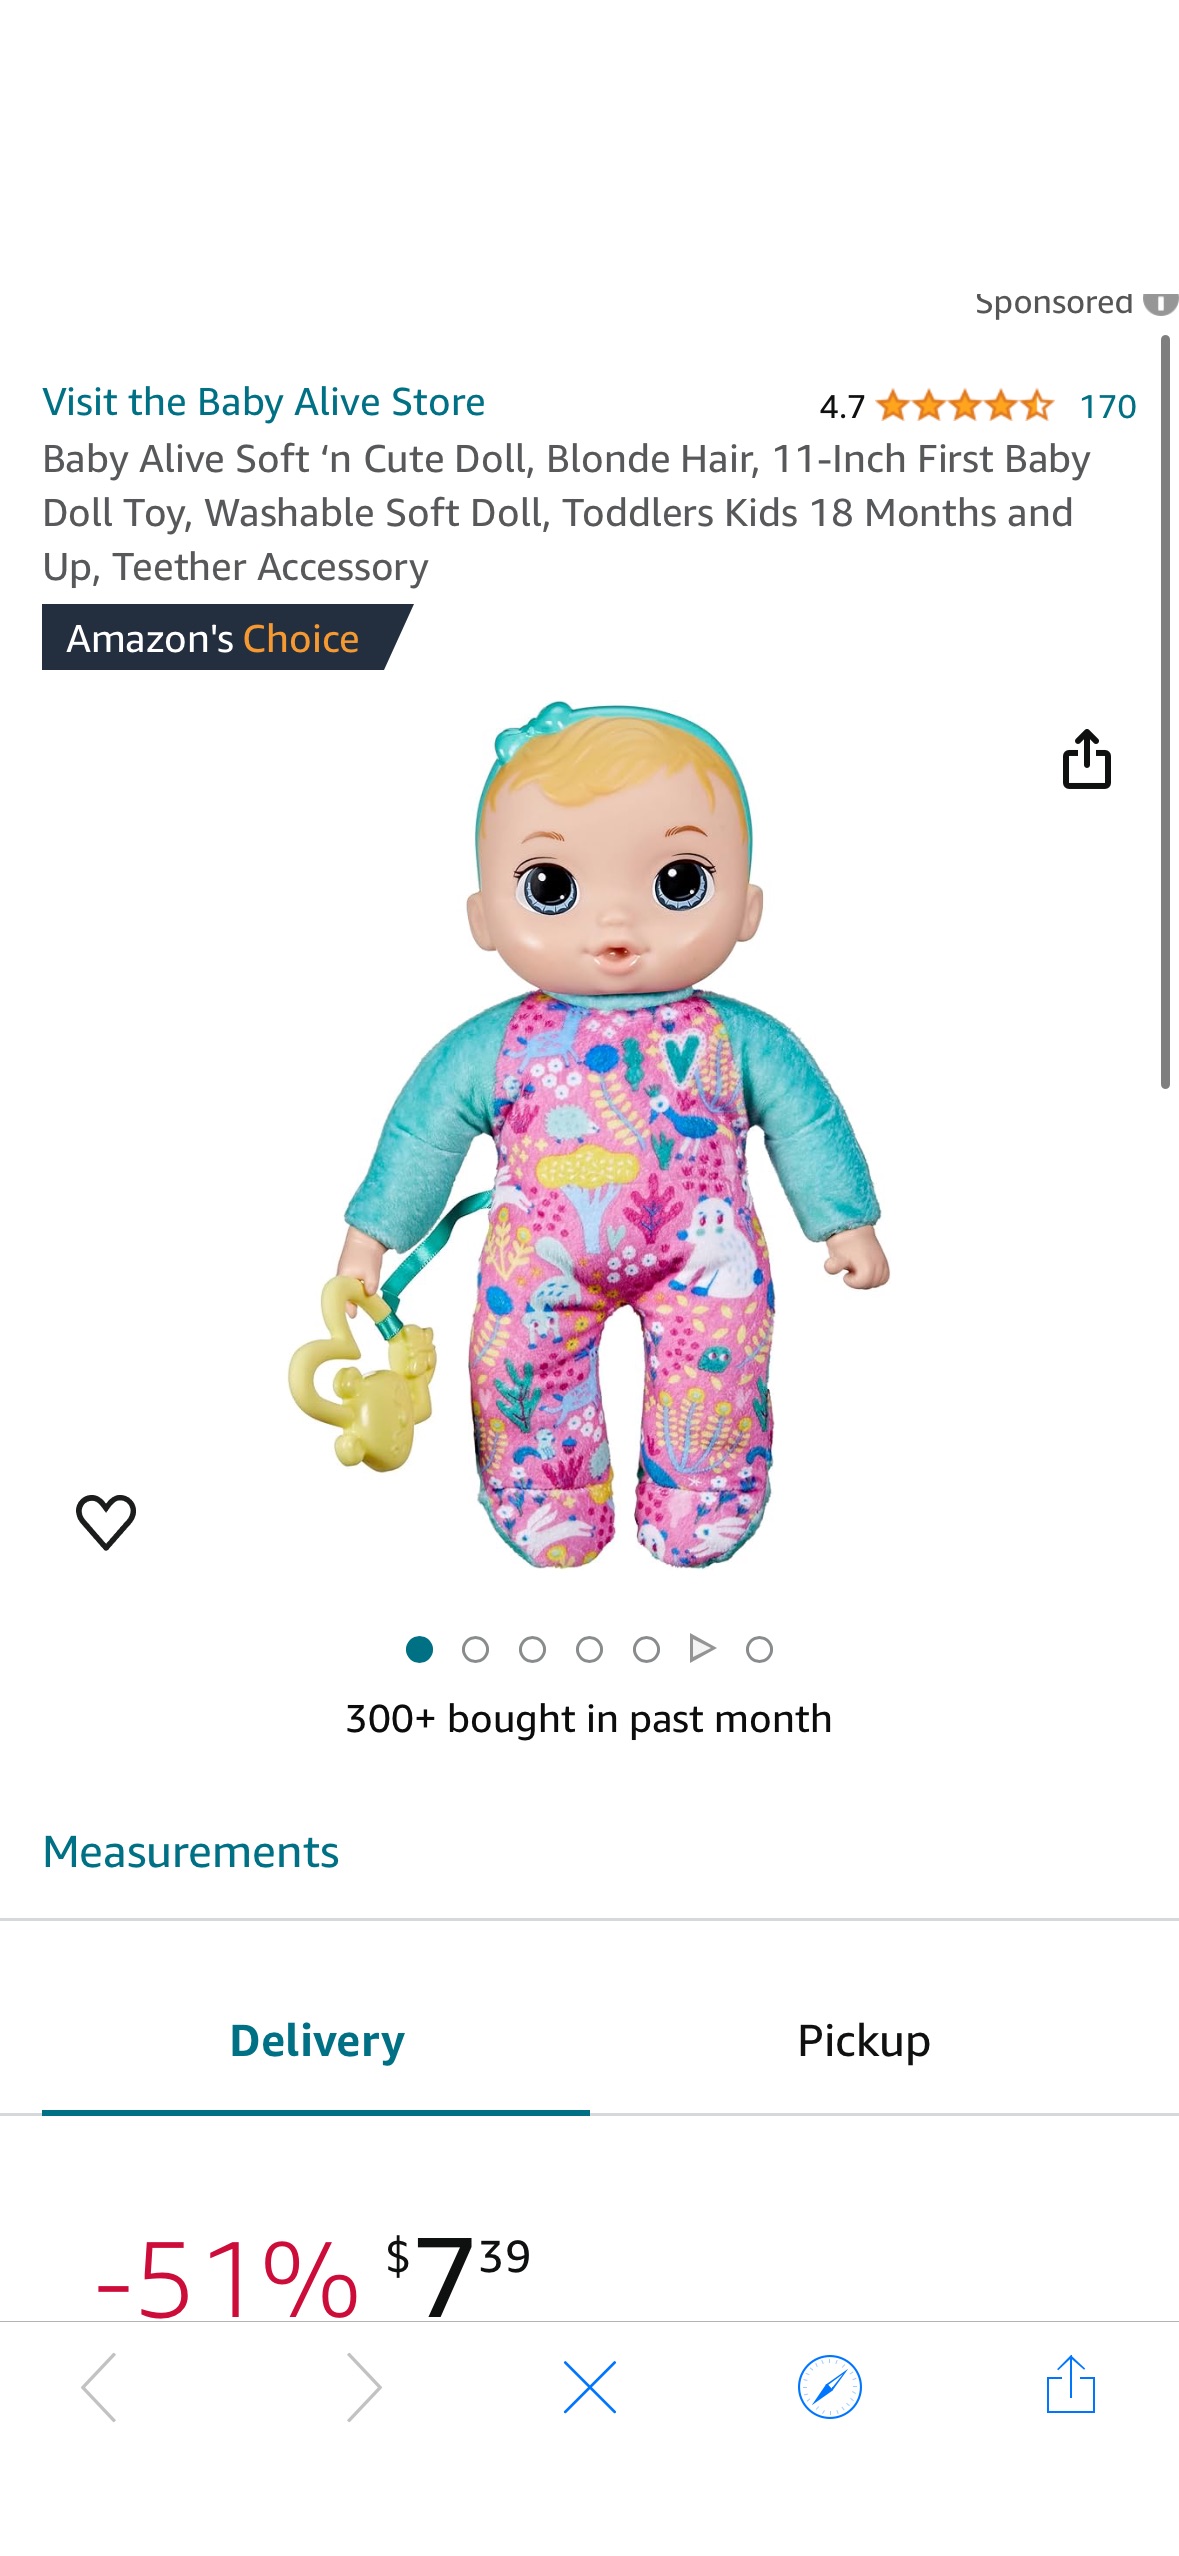 Amazon.com: Baby Alive Soft ‘n Cute Doll, Blonde Hair, 11-Inch First Baby Doll Toy, Washable Soft Doll, Toddlers Kids 18 Months and Up, Teether Accessory : Toys & Games